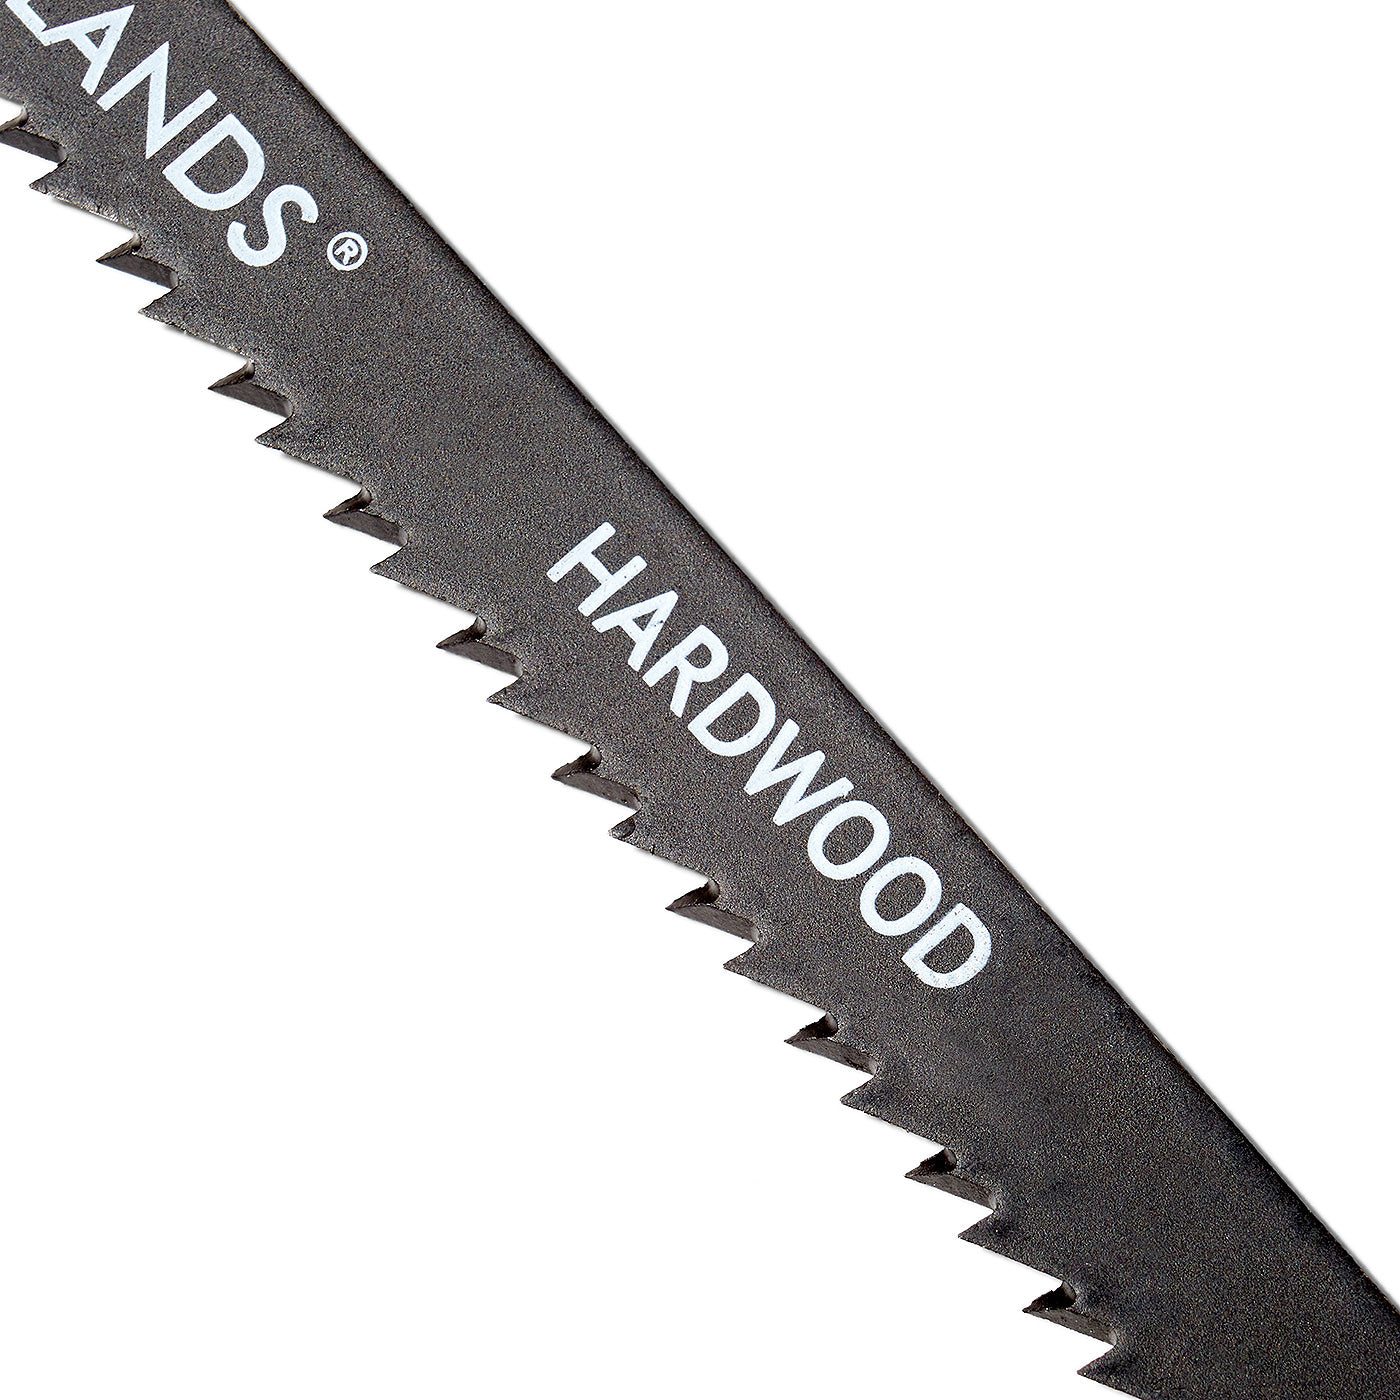 Jigsaw Blades - Hardwood - T101BF - Pack of 5